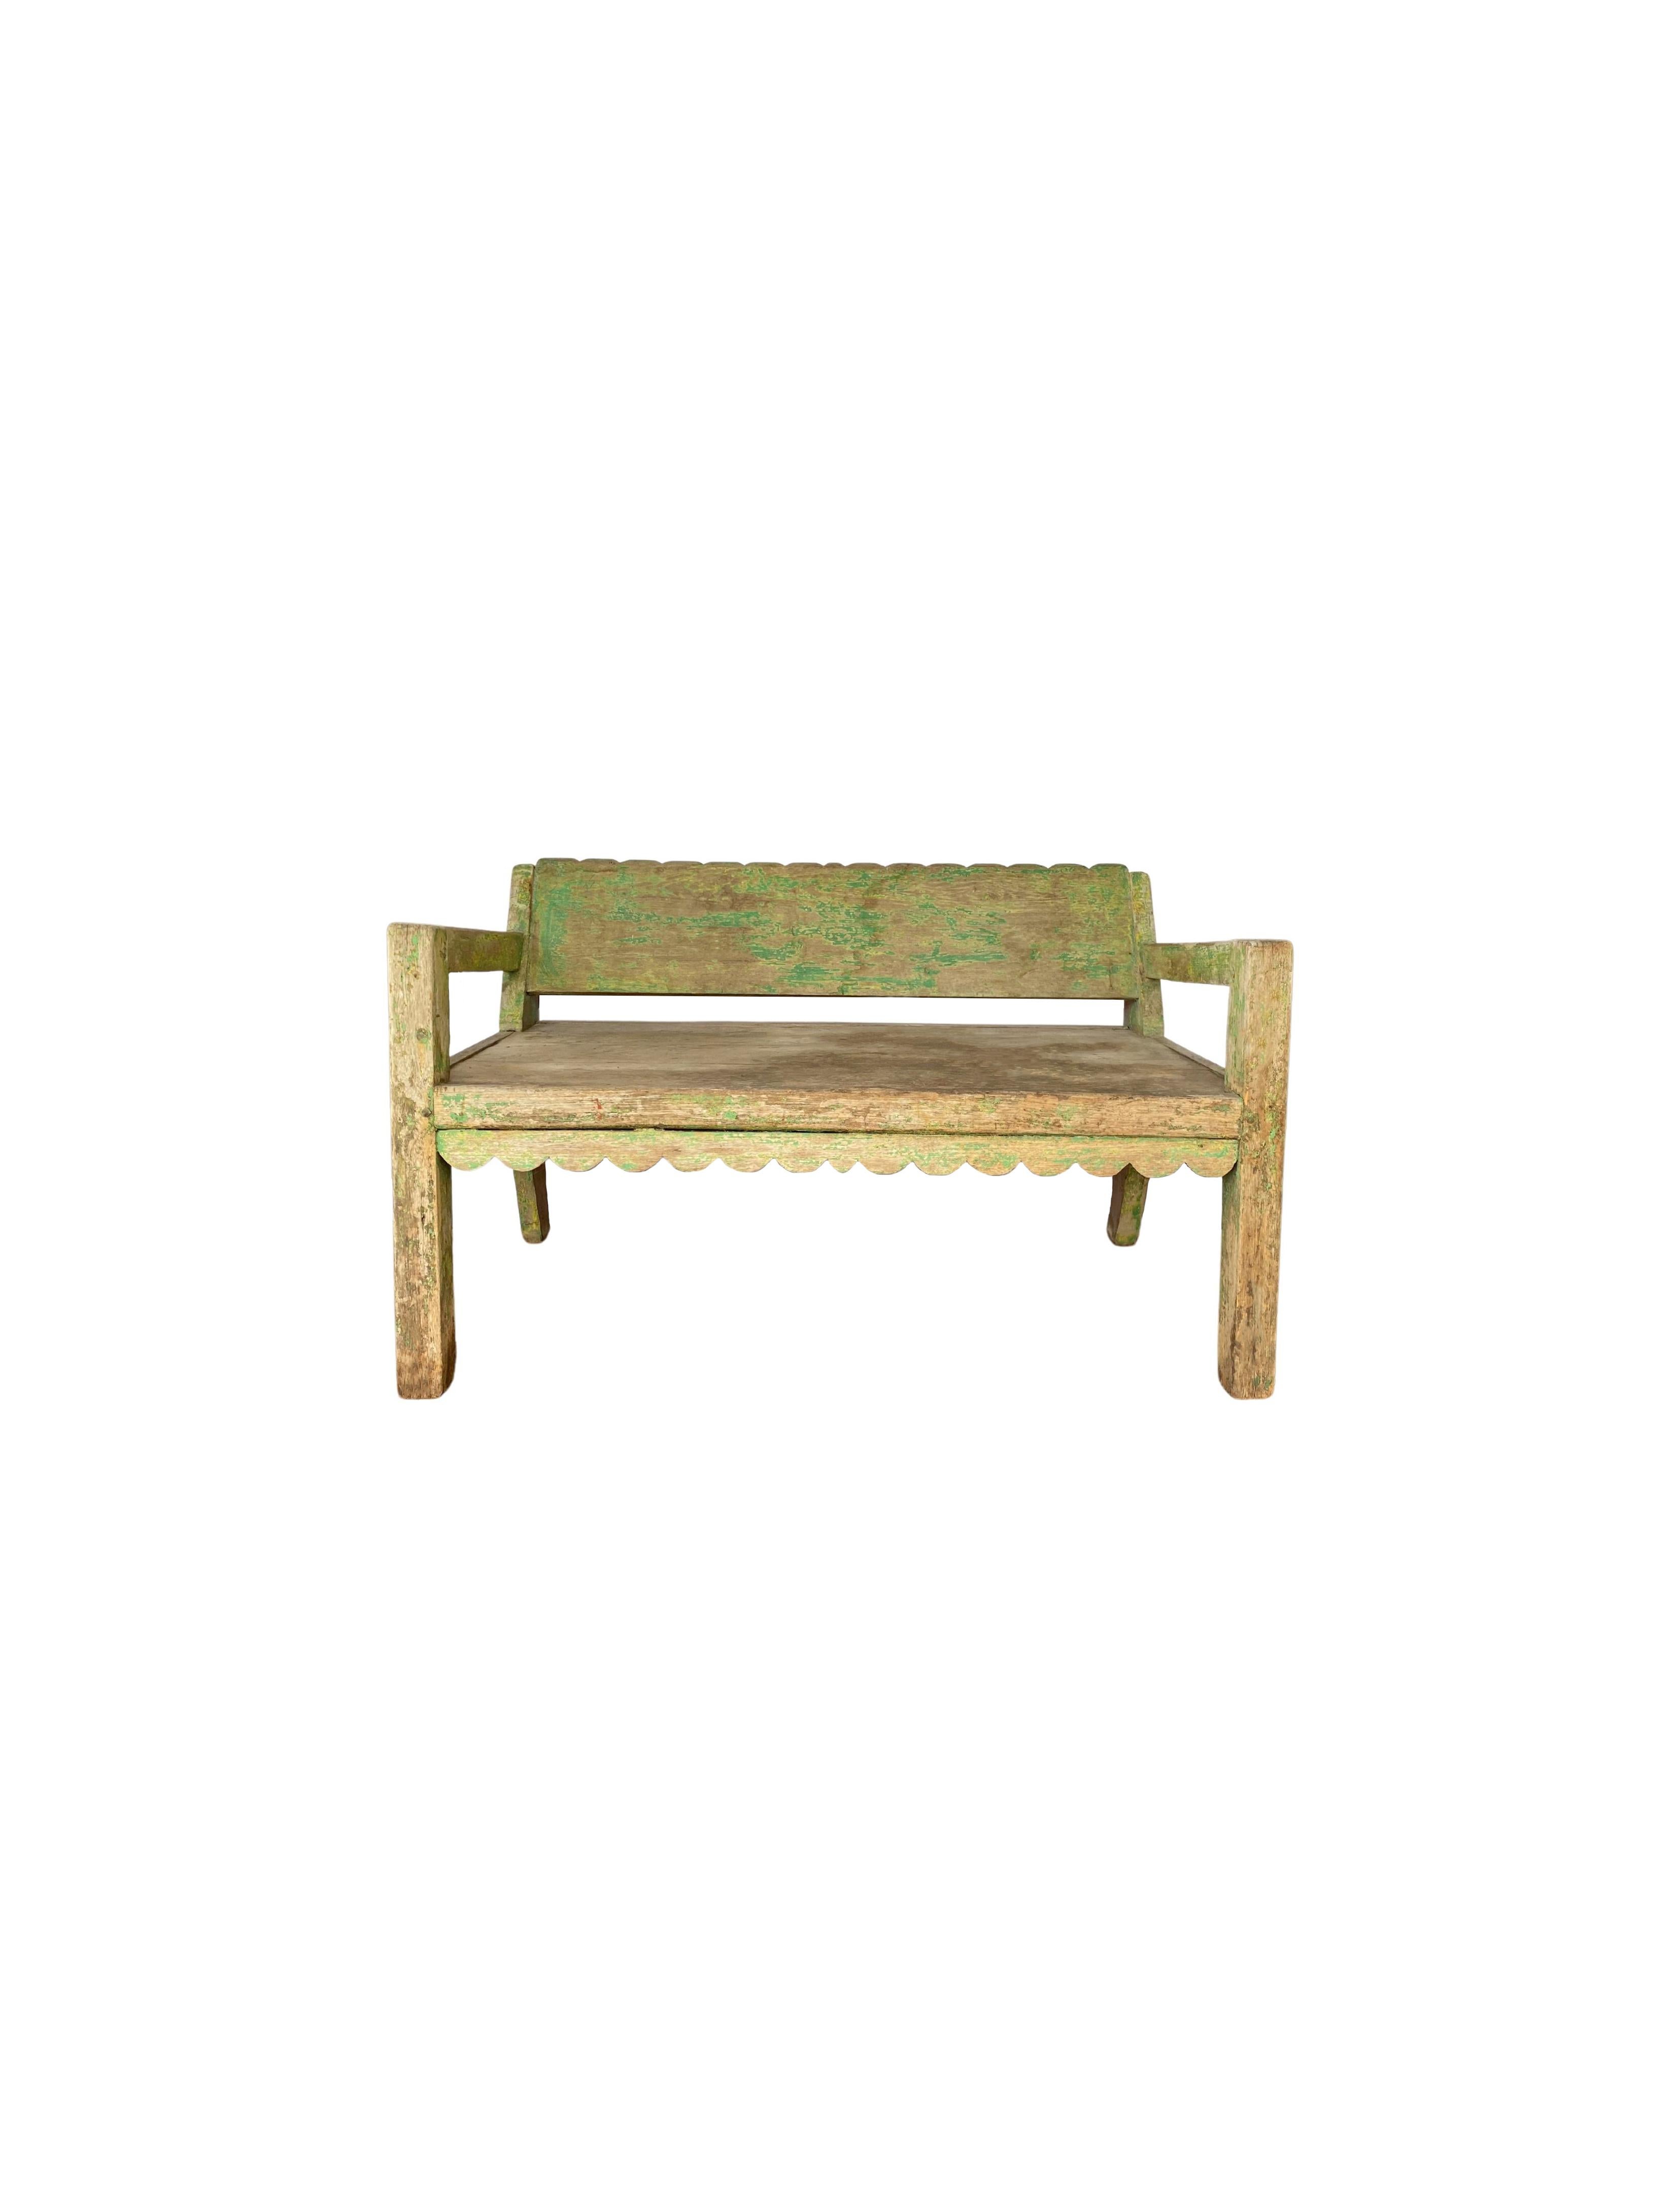 This hand-crafted teak wood low bench originates from the Island of Madura, off the coast of Northeastern Java. It features subtle carved detailing on the backrest as well as a wonderful green polychrome. The fading of the polychrome and age-related